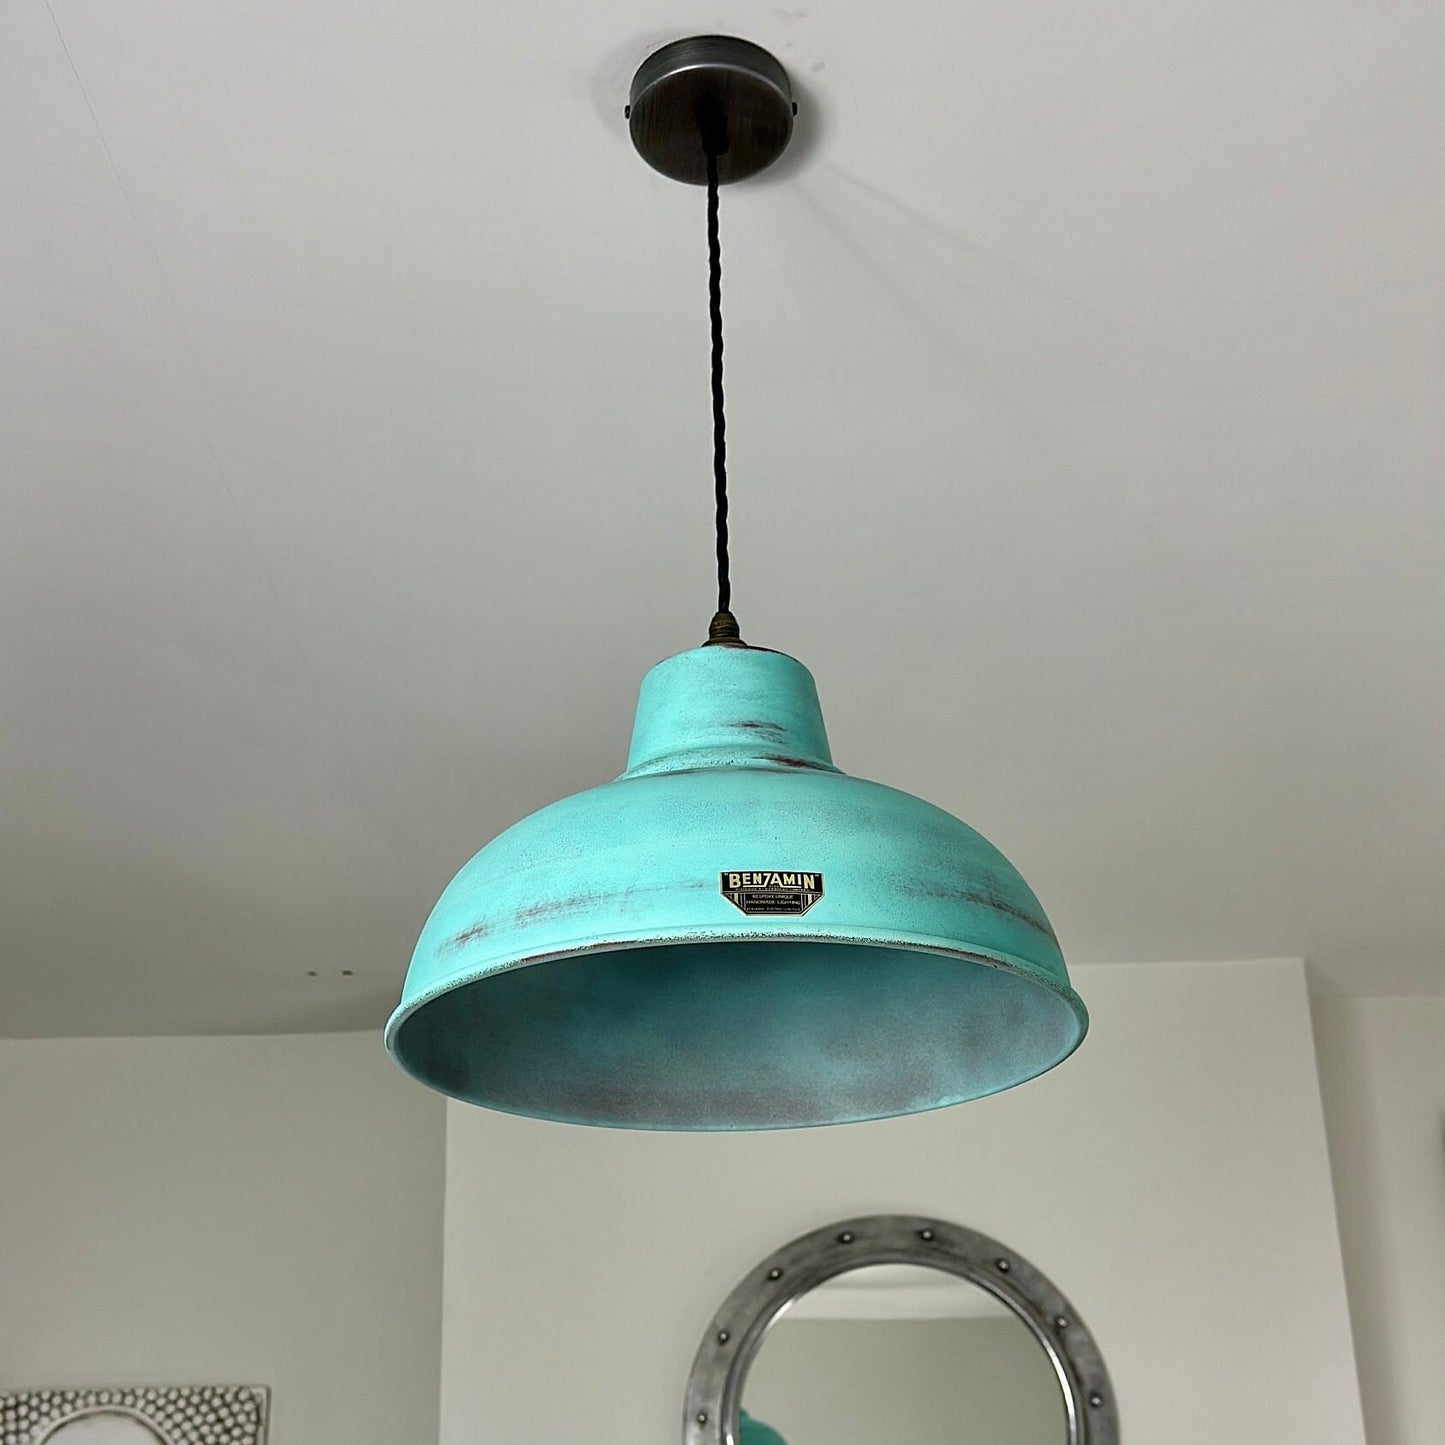 Salthouse XL ~ Verdigris Copper Patina Industrial shade light ceiling dining room kitchen table vintage filament lamps pendant 14.5 Inch